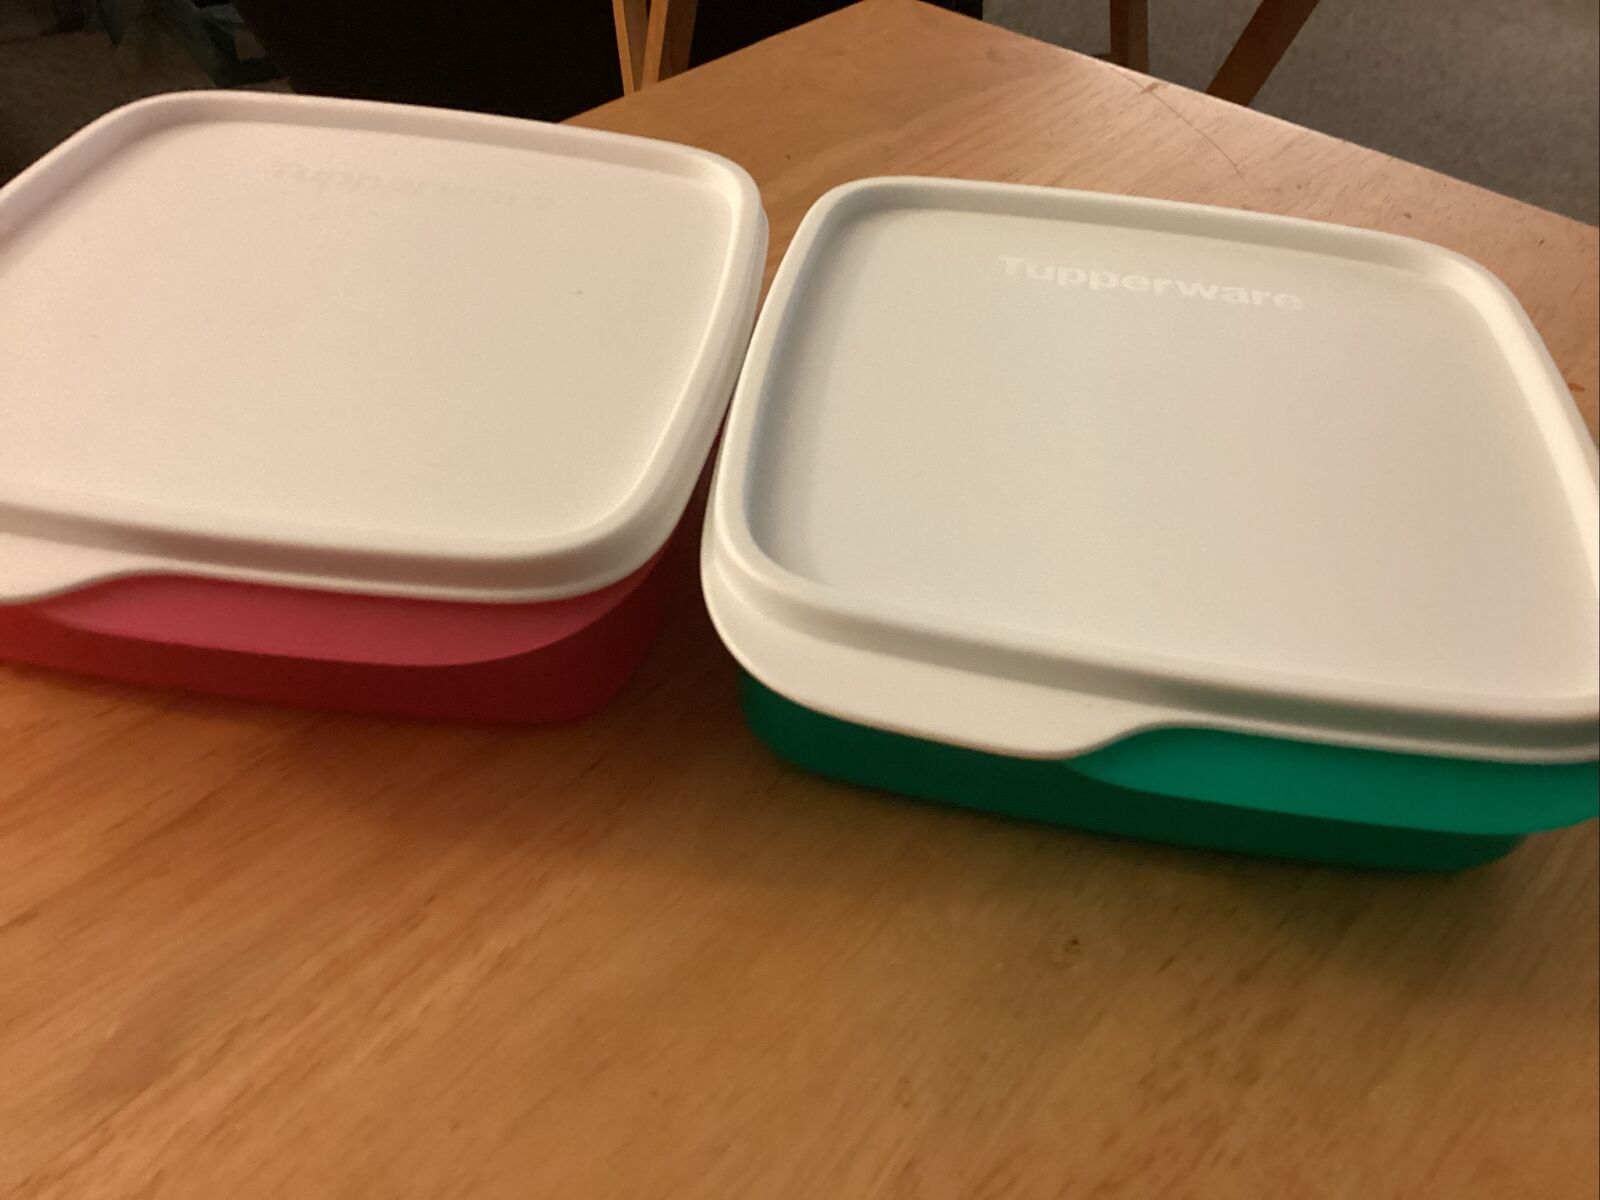 TUPPERWARE Lunch-It Container Divided Set of 2 New